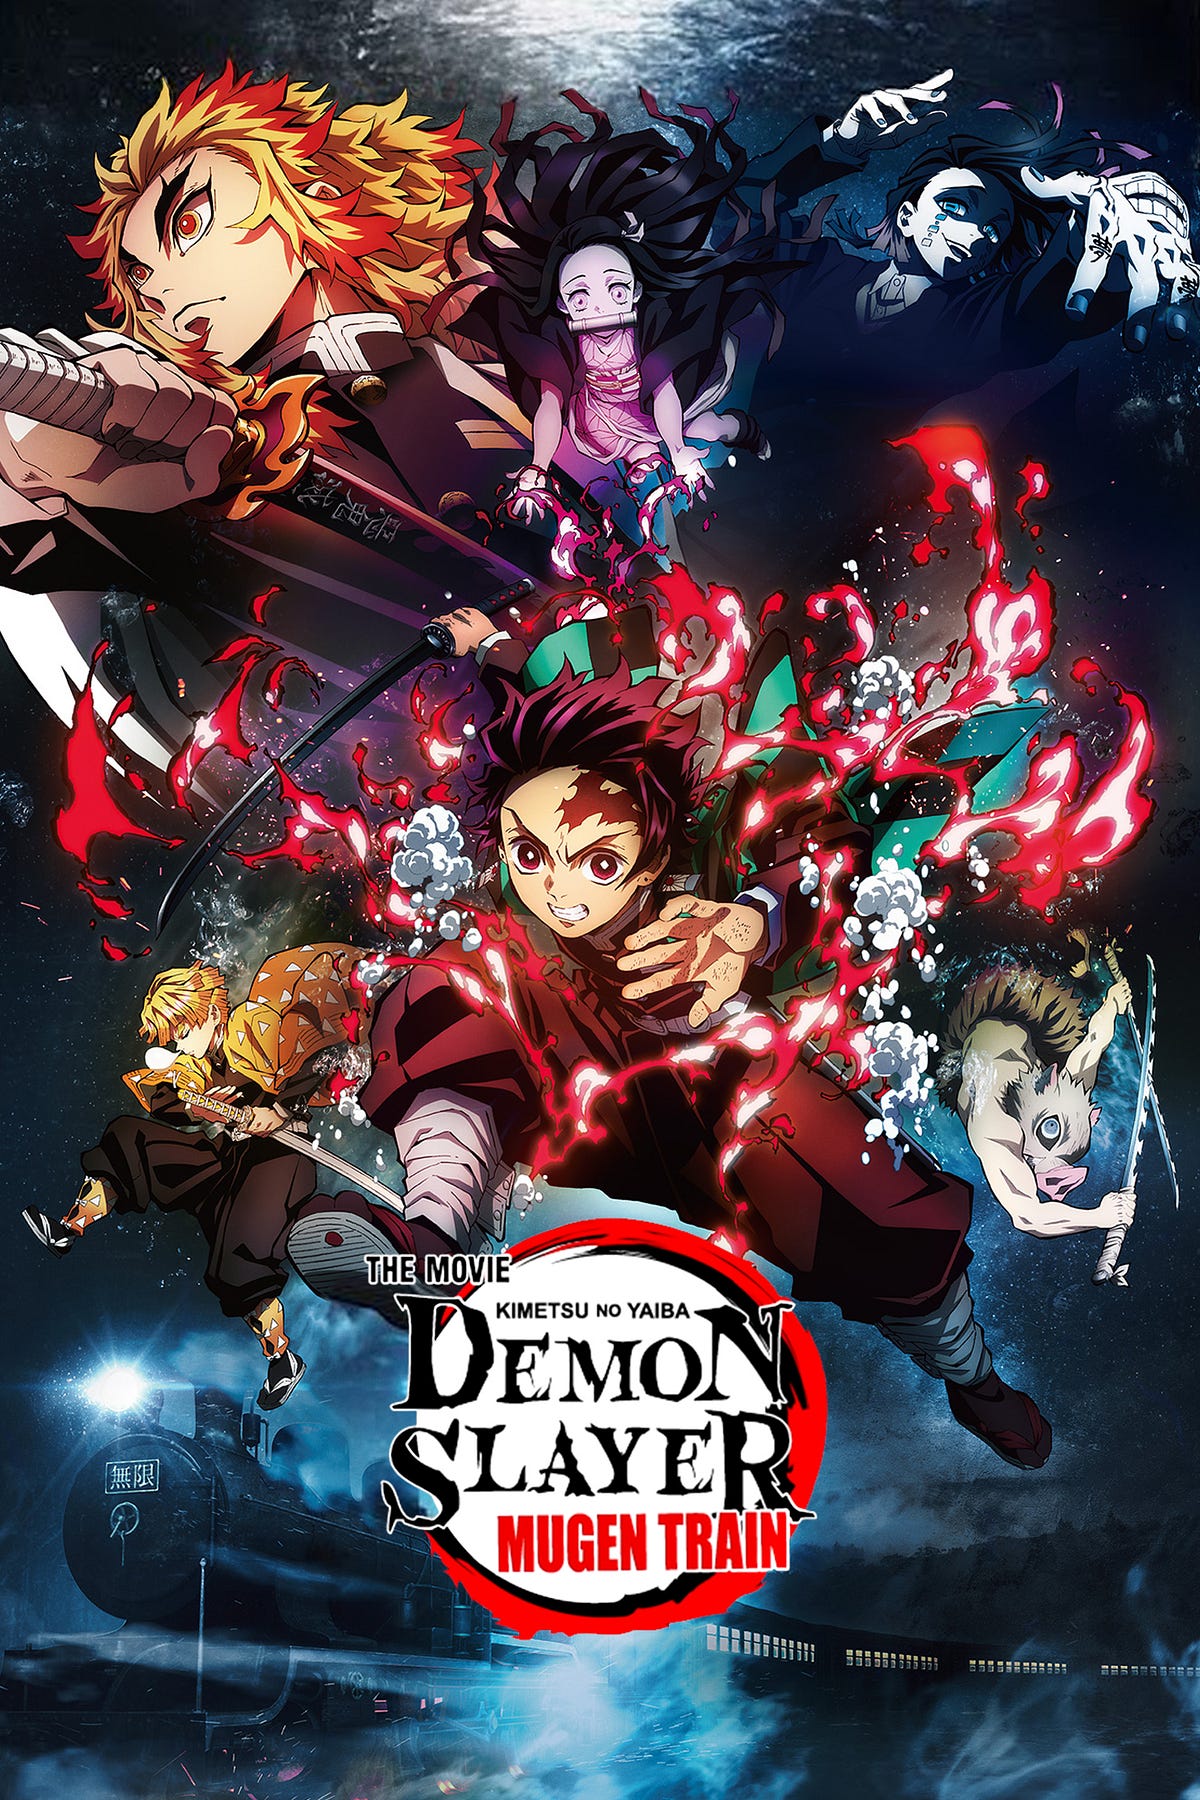 Top 27 Best Demon Anime: The Ultimate List (2023)